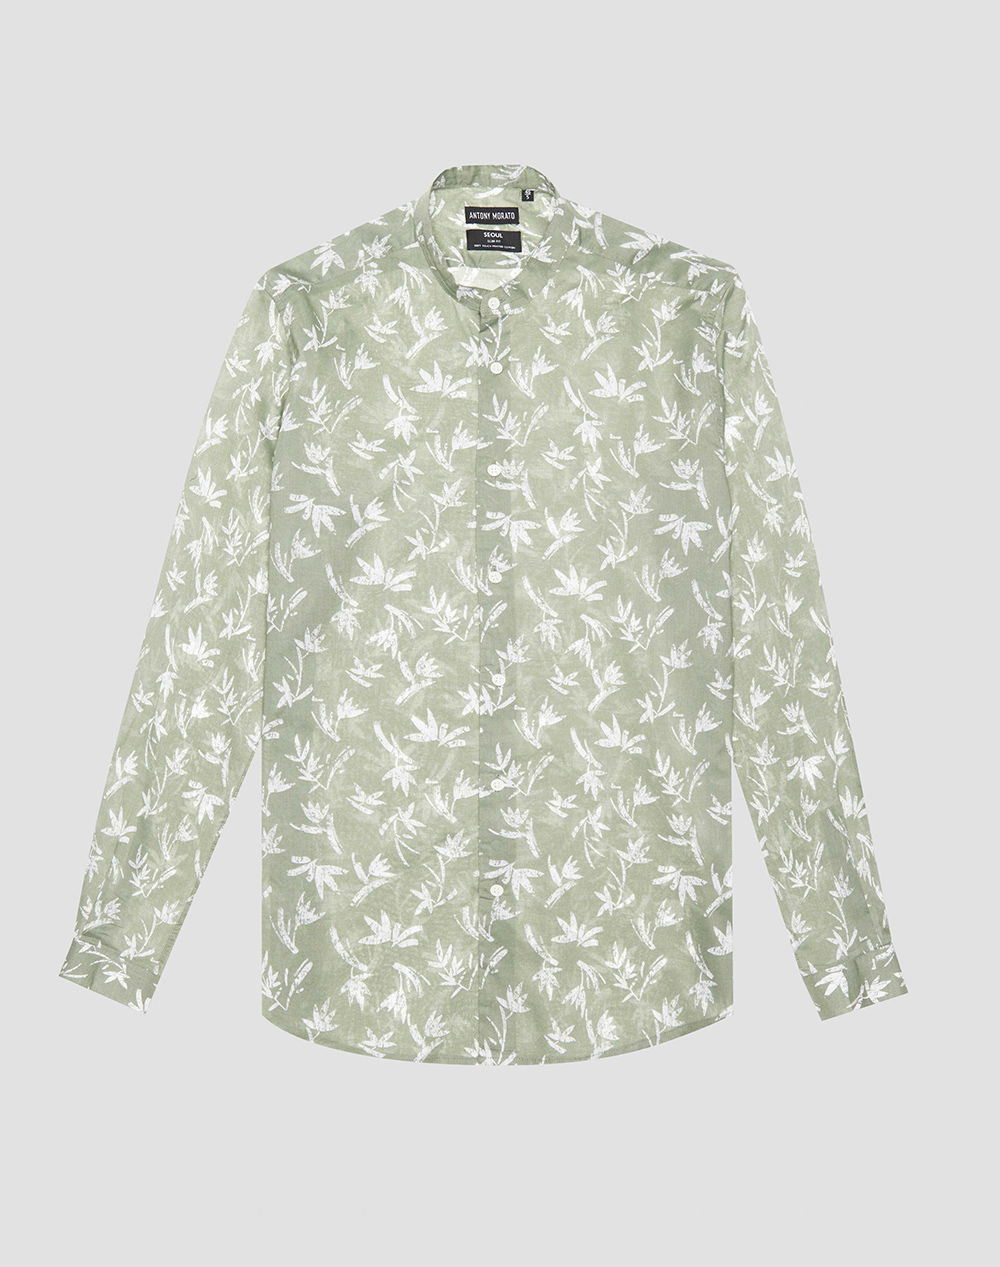 ANTONY MORATO MMSL00631FA430609 SHIRT SEOUL SLIM FIT IN SOFT TOUCH PRINTED COTTON FABRIC MENS SHIRT